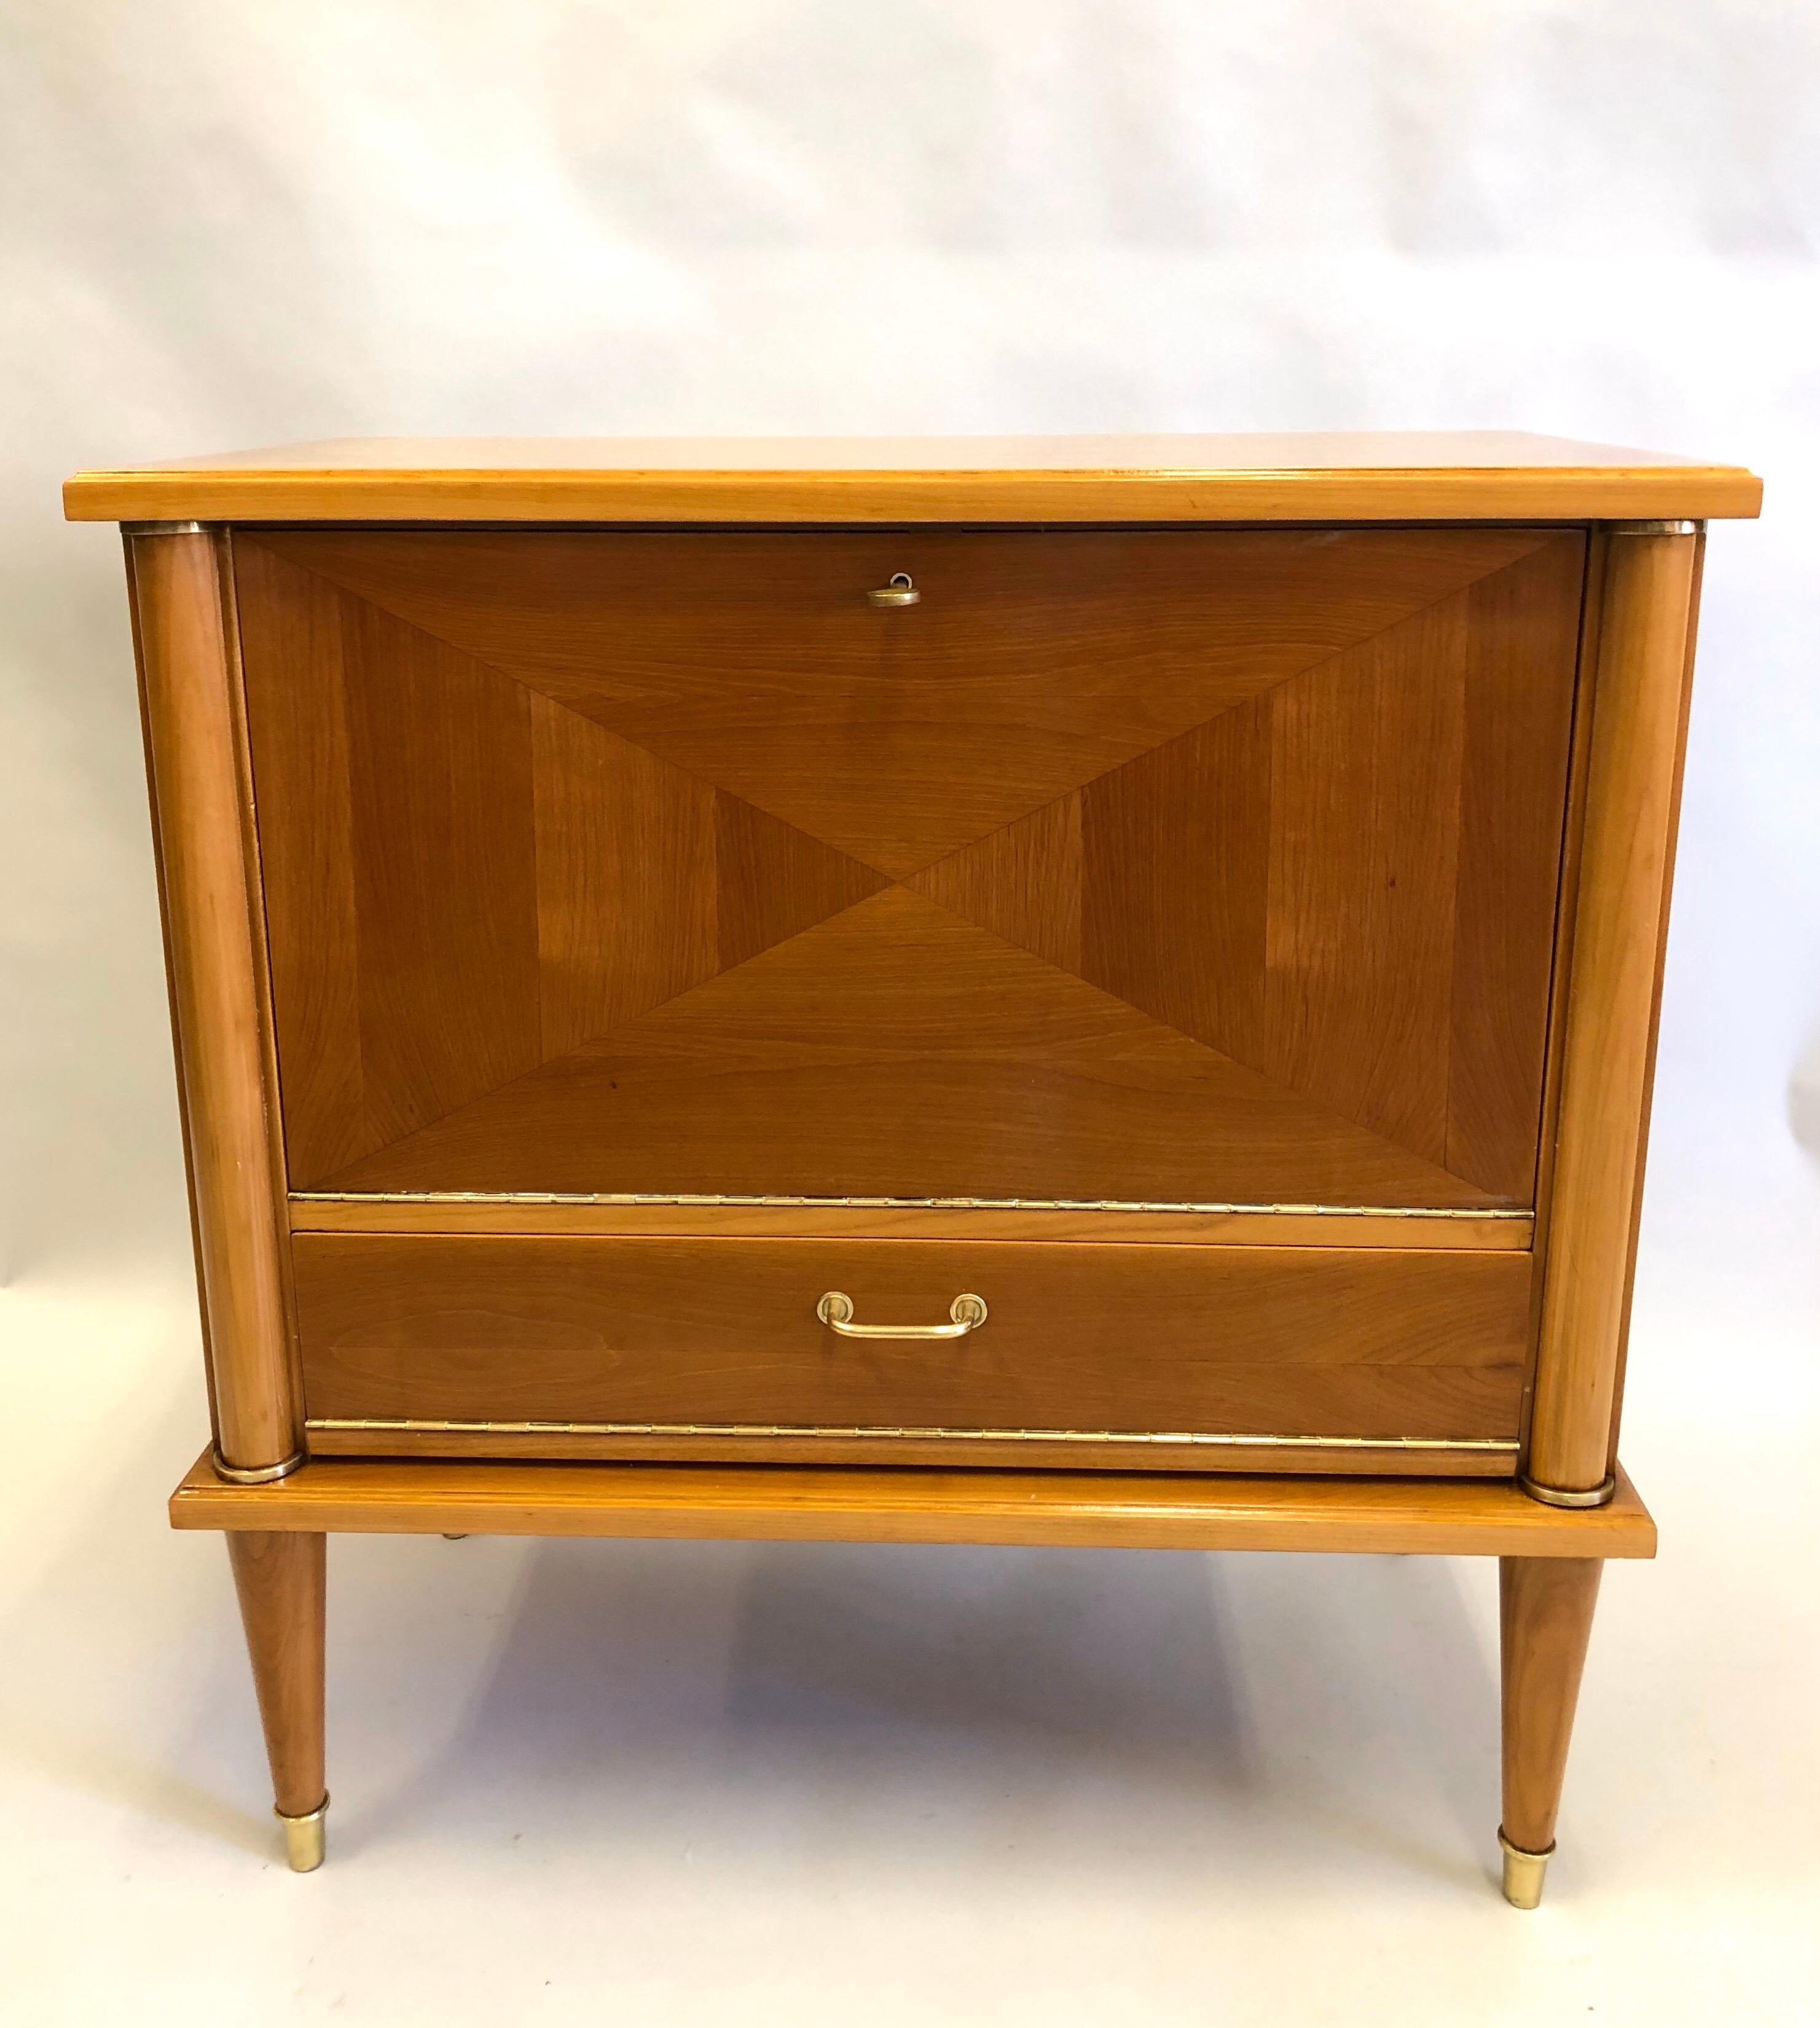 Mid-Century Modern French Modern Neoclassical Cherry Inlay Sideboard/ Console/ Bar by Andre Arbus